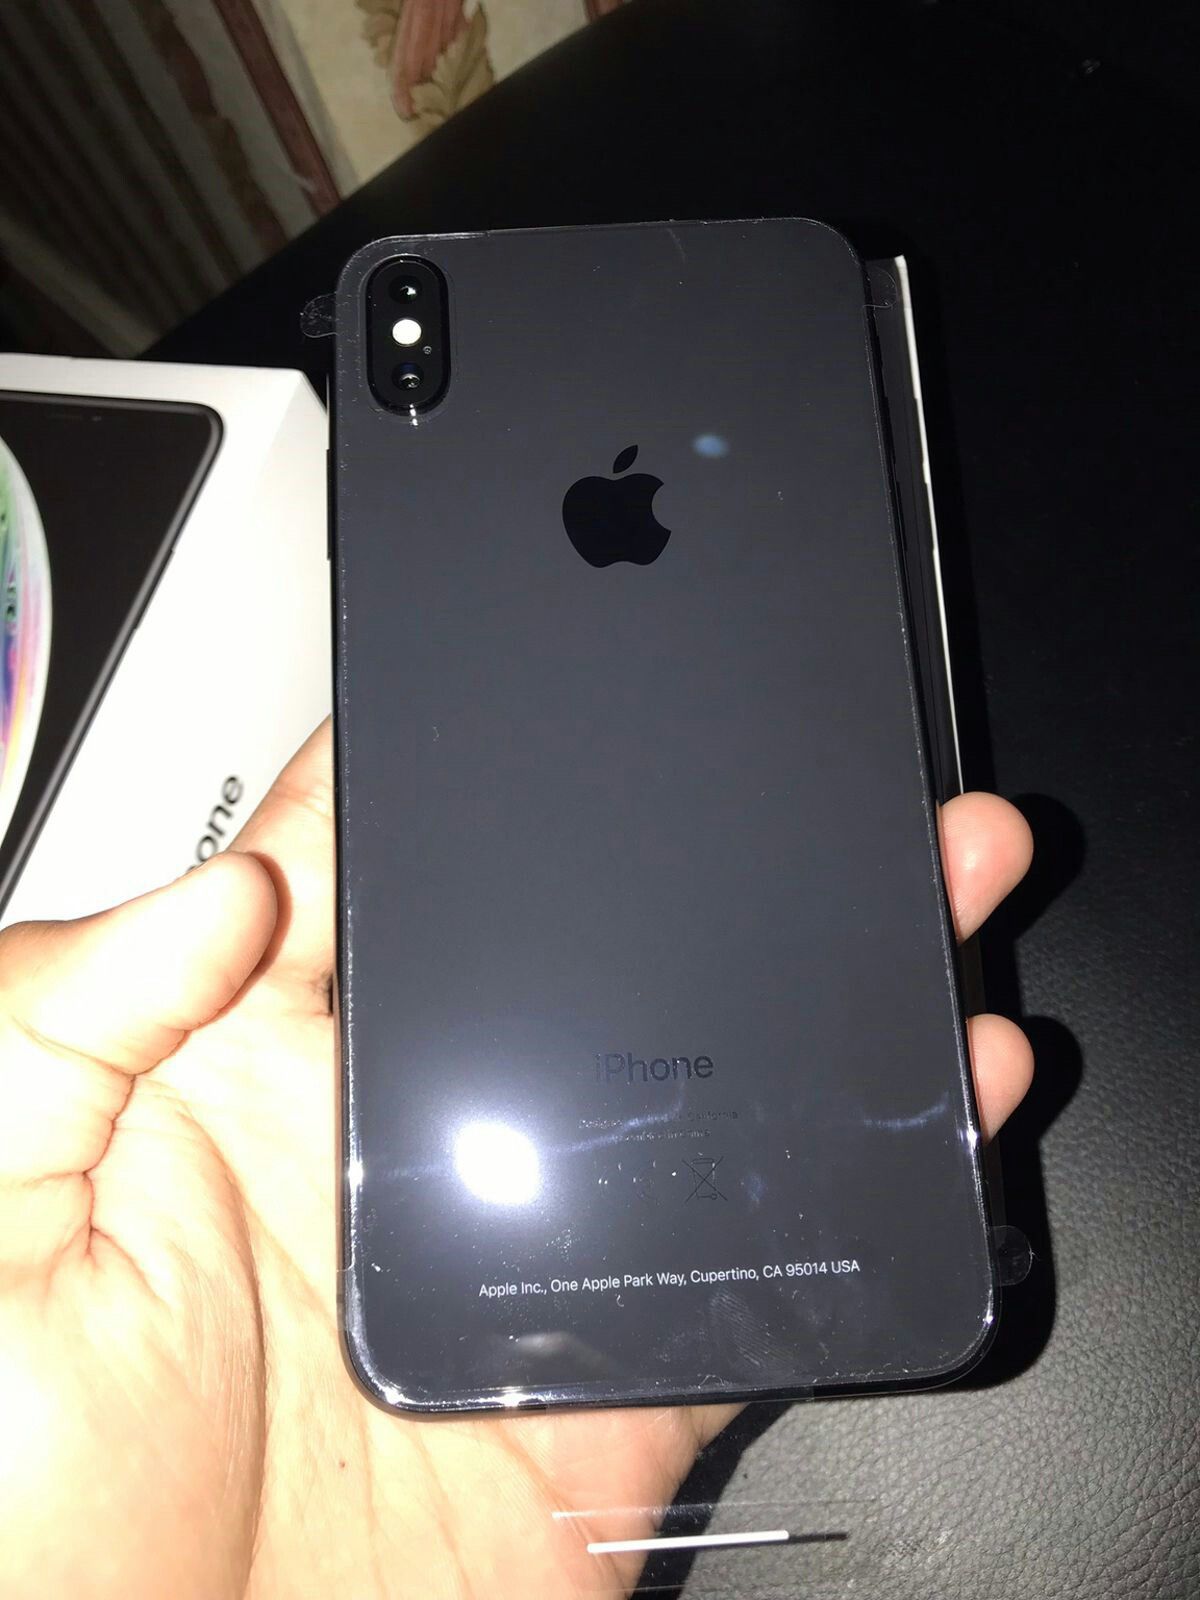 Iphone XS max 256GB fully unlocked for all carriers